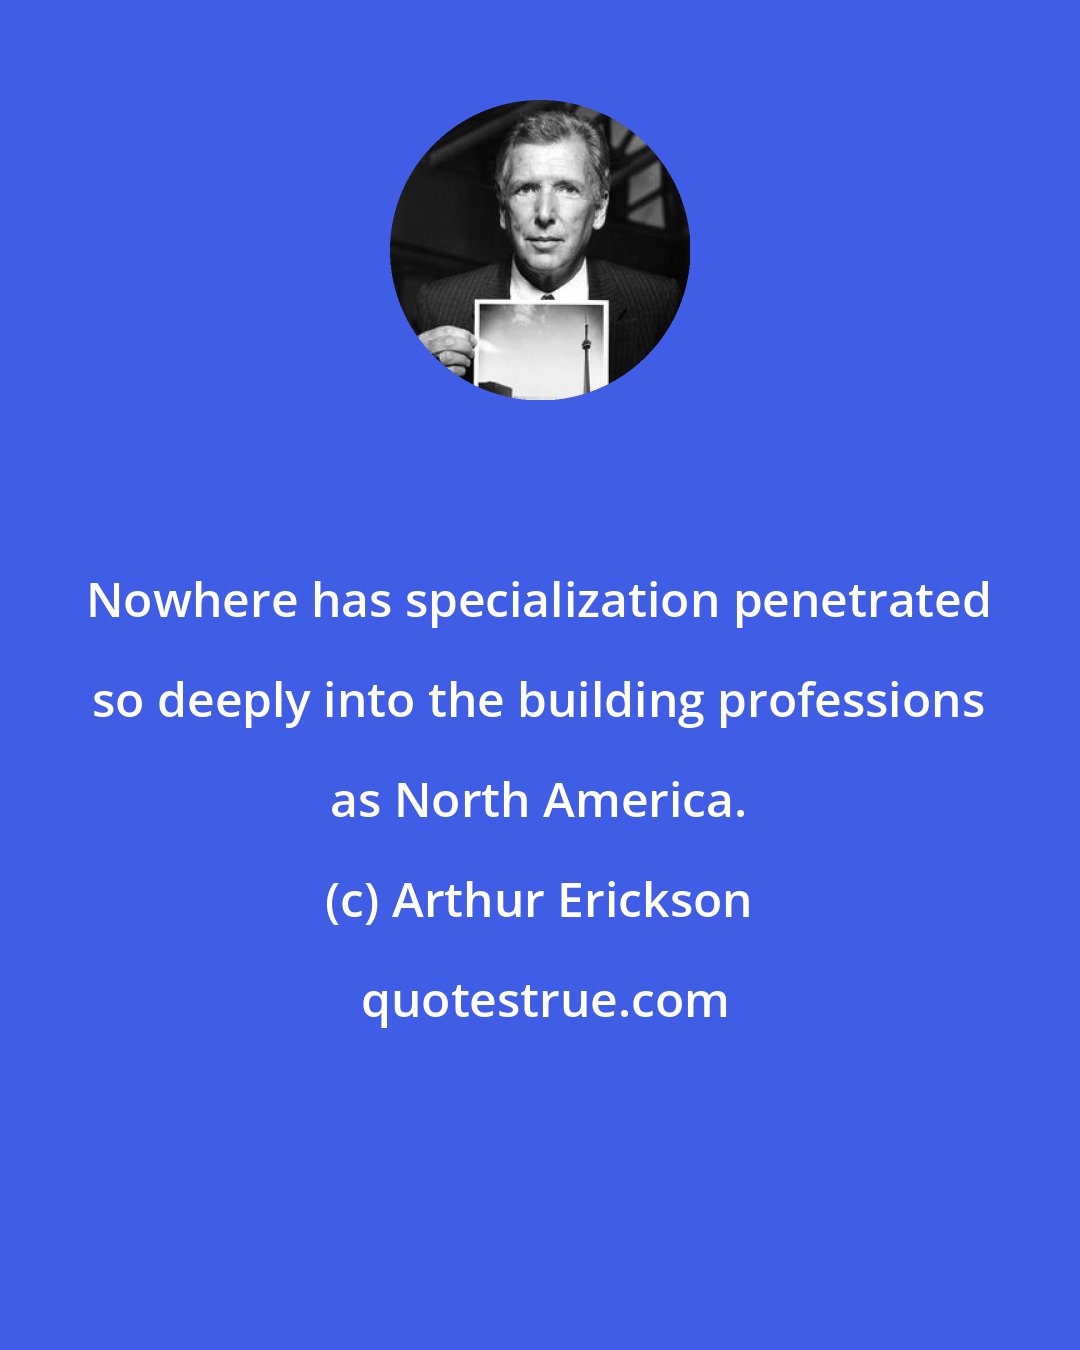 Arthur Erickson: Nowhere has specialization penetrated so deeply into the building professions as North America.